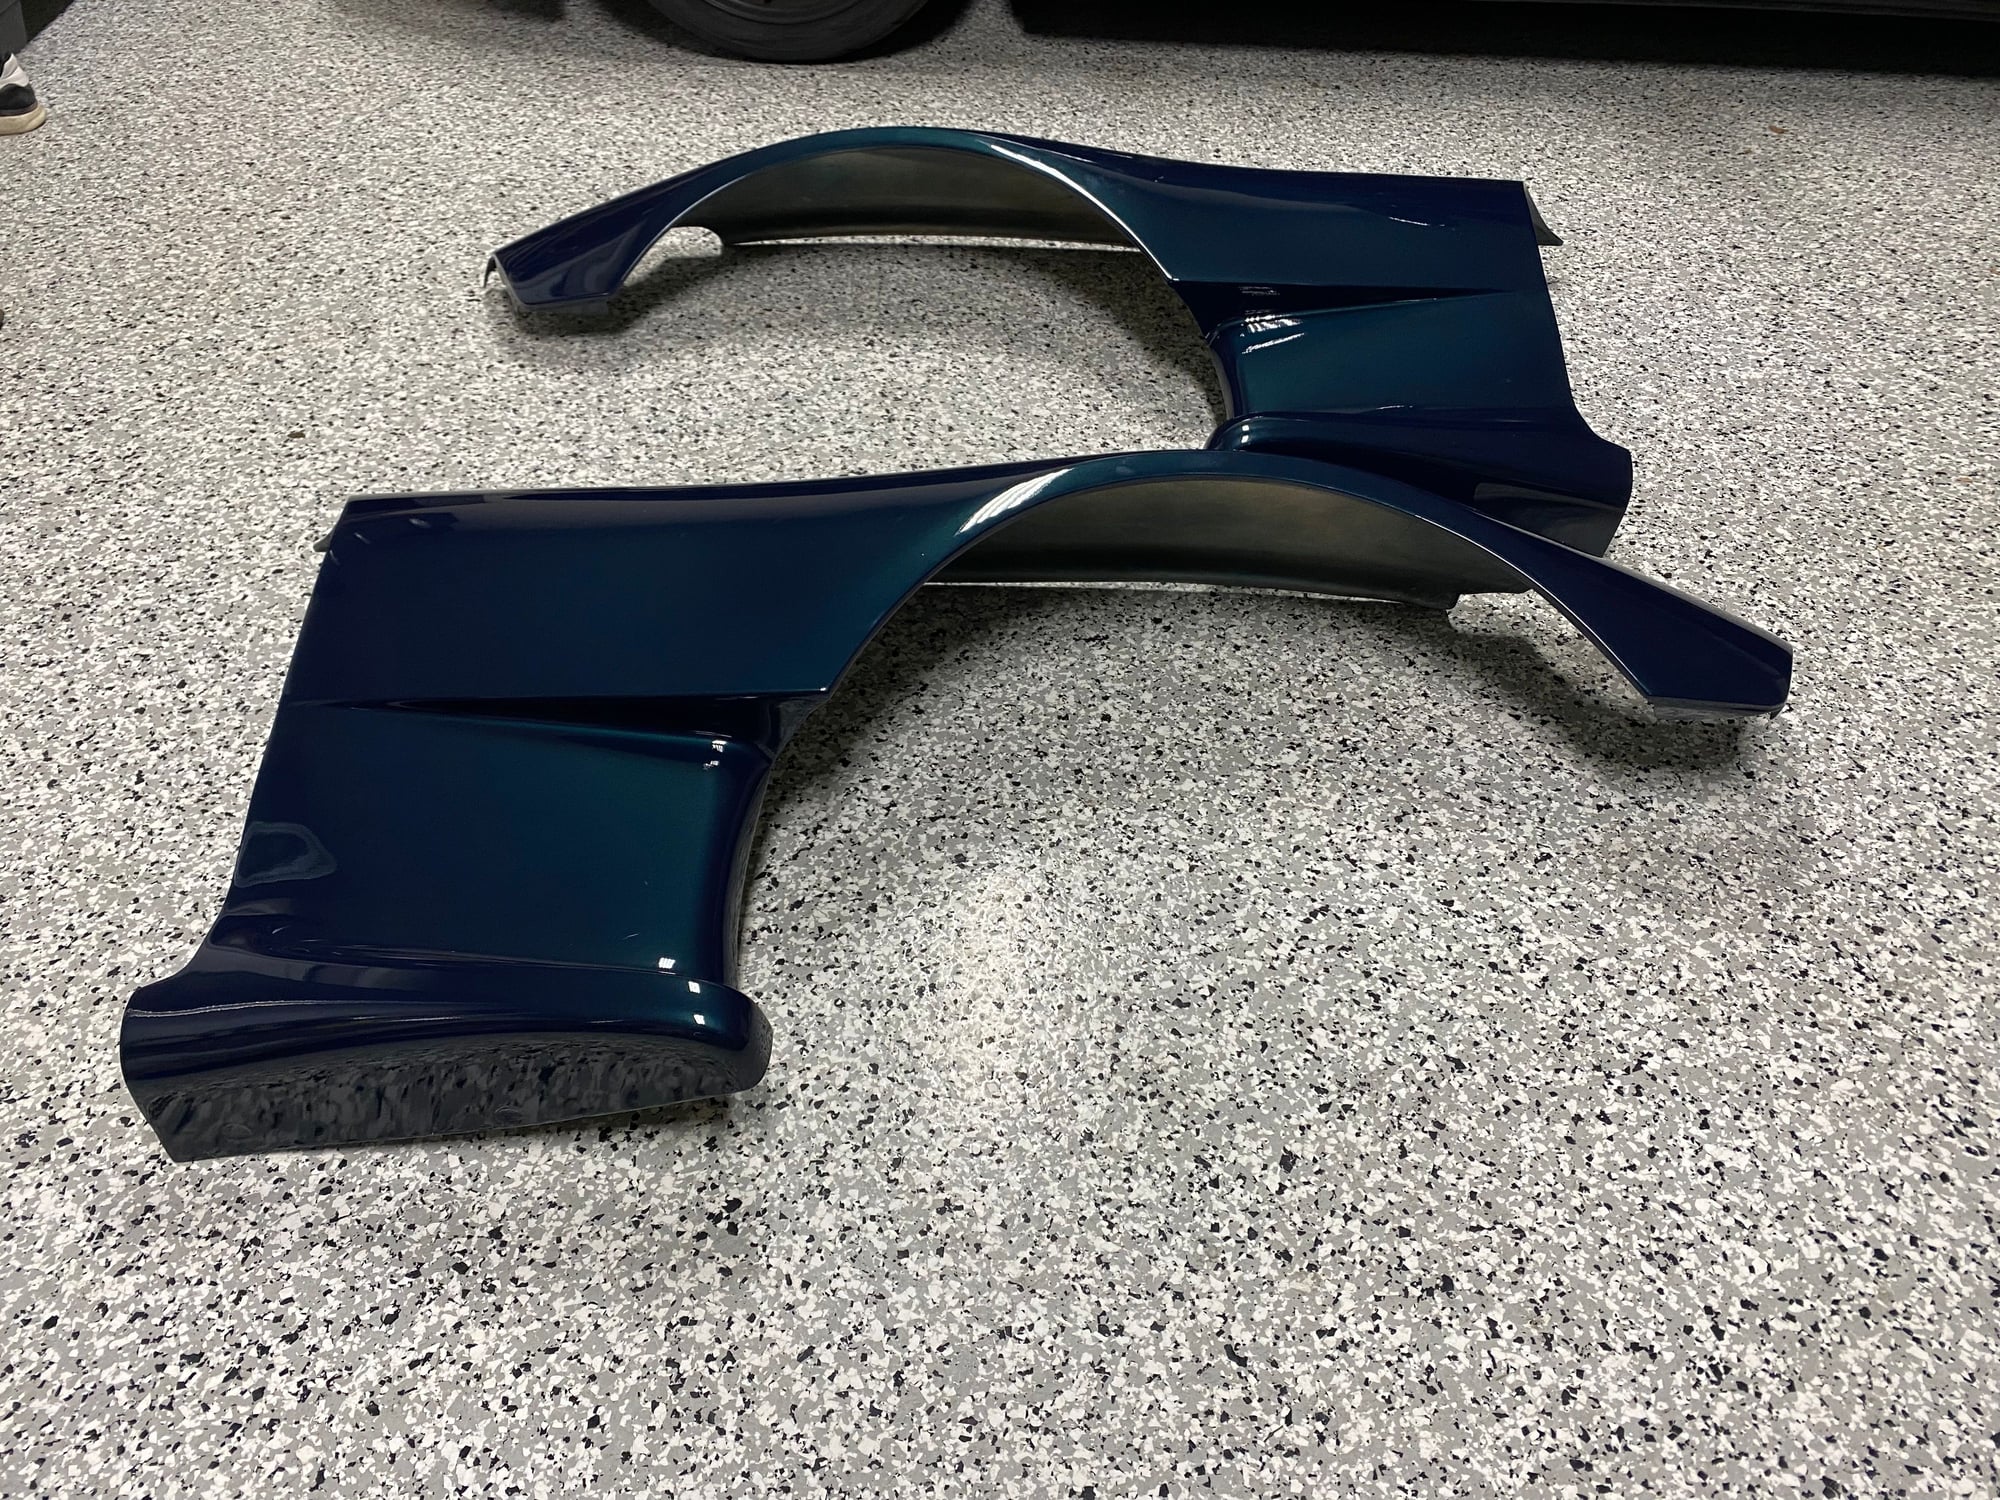 Exterior Body Parts - FEED style front fenders - New - 1993 to 2002 Mazda RX-7 - Bend, OR 97701, United States